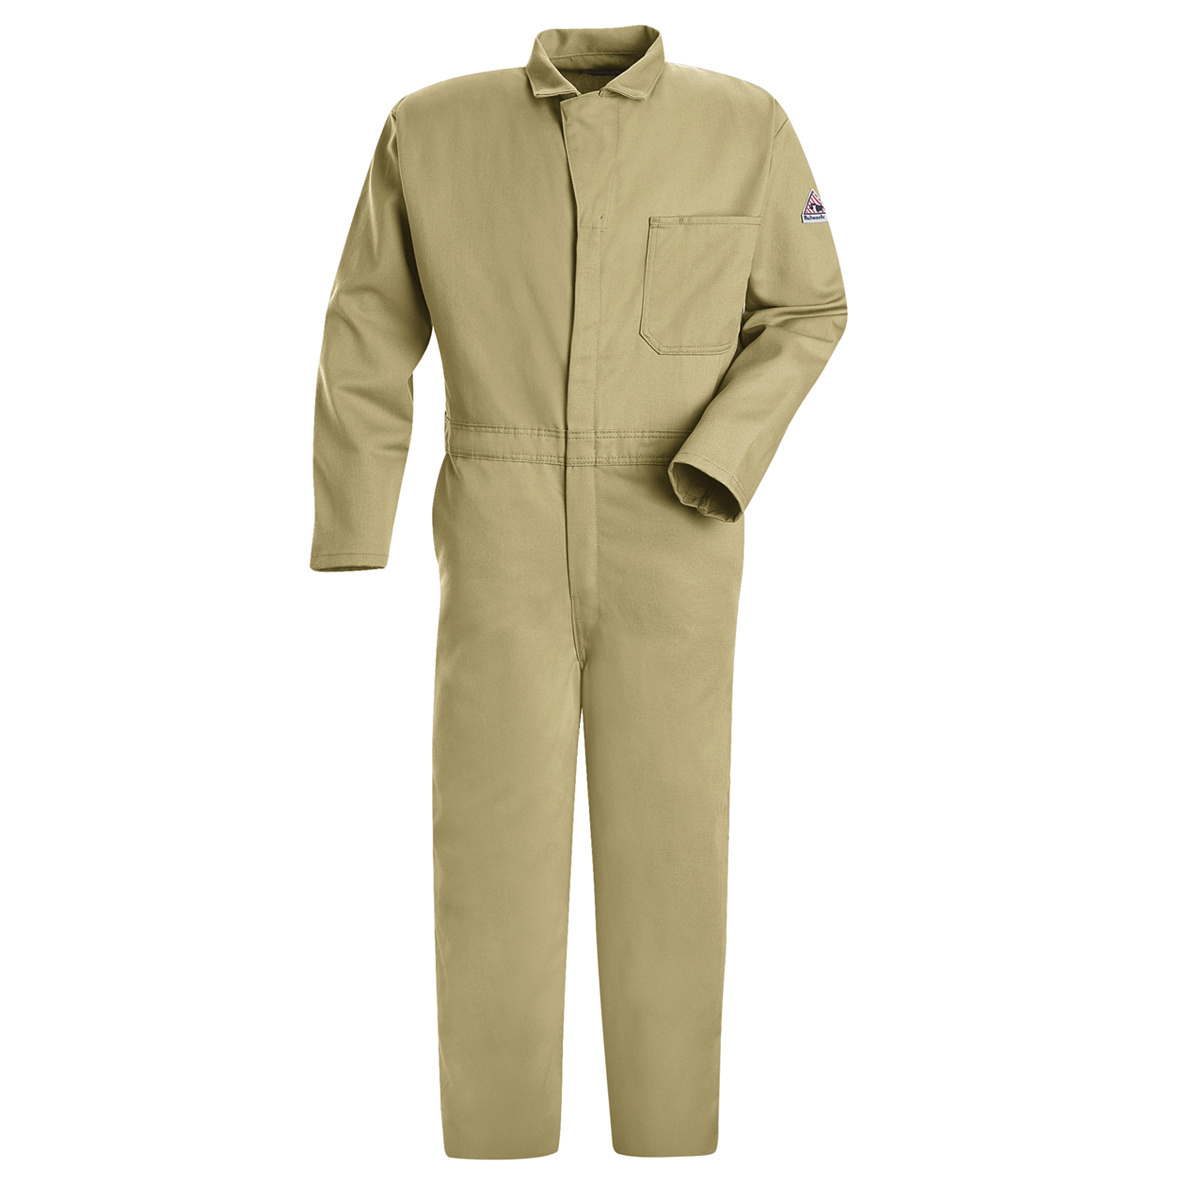 Bulwark® 60 Tall Khaki EXCEL FR® Twill Cotton Flame Resistant Coveralls With Zipper Front Closure